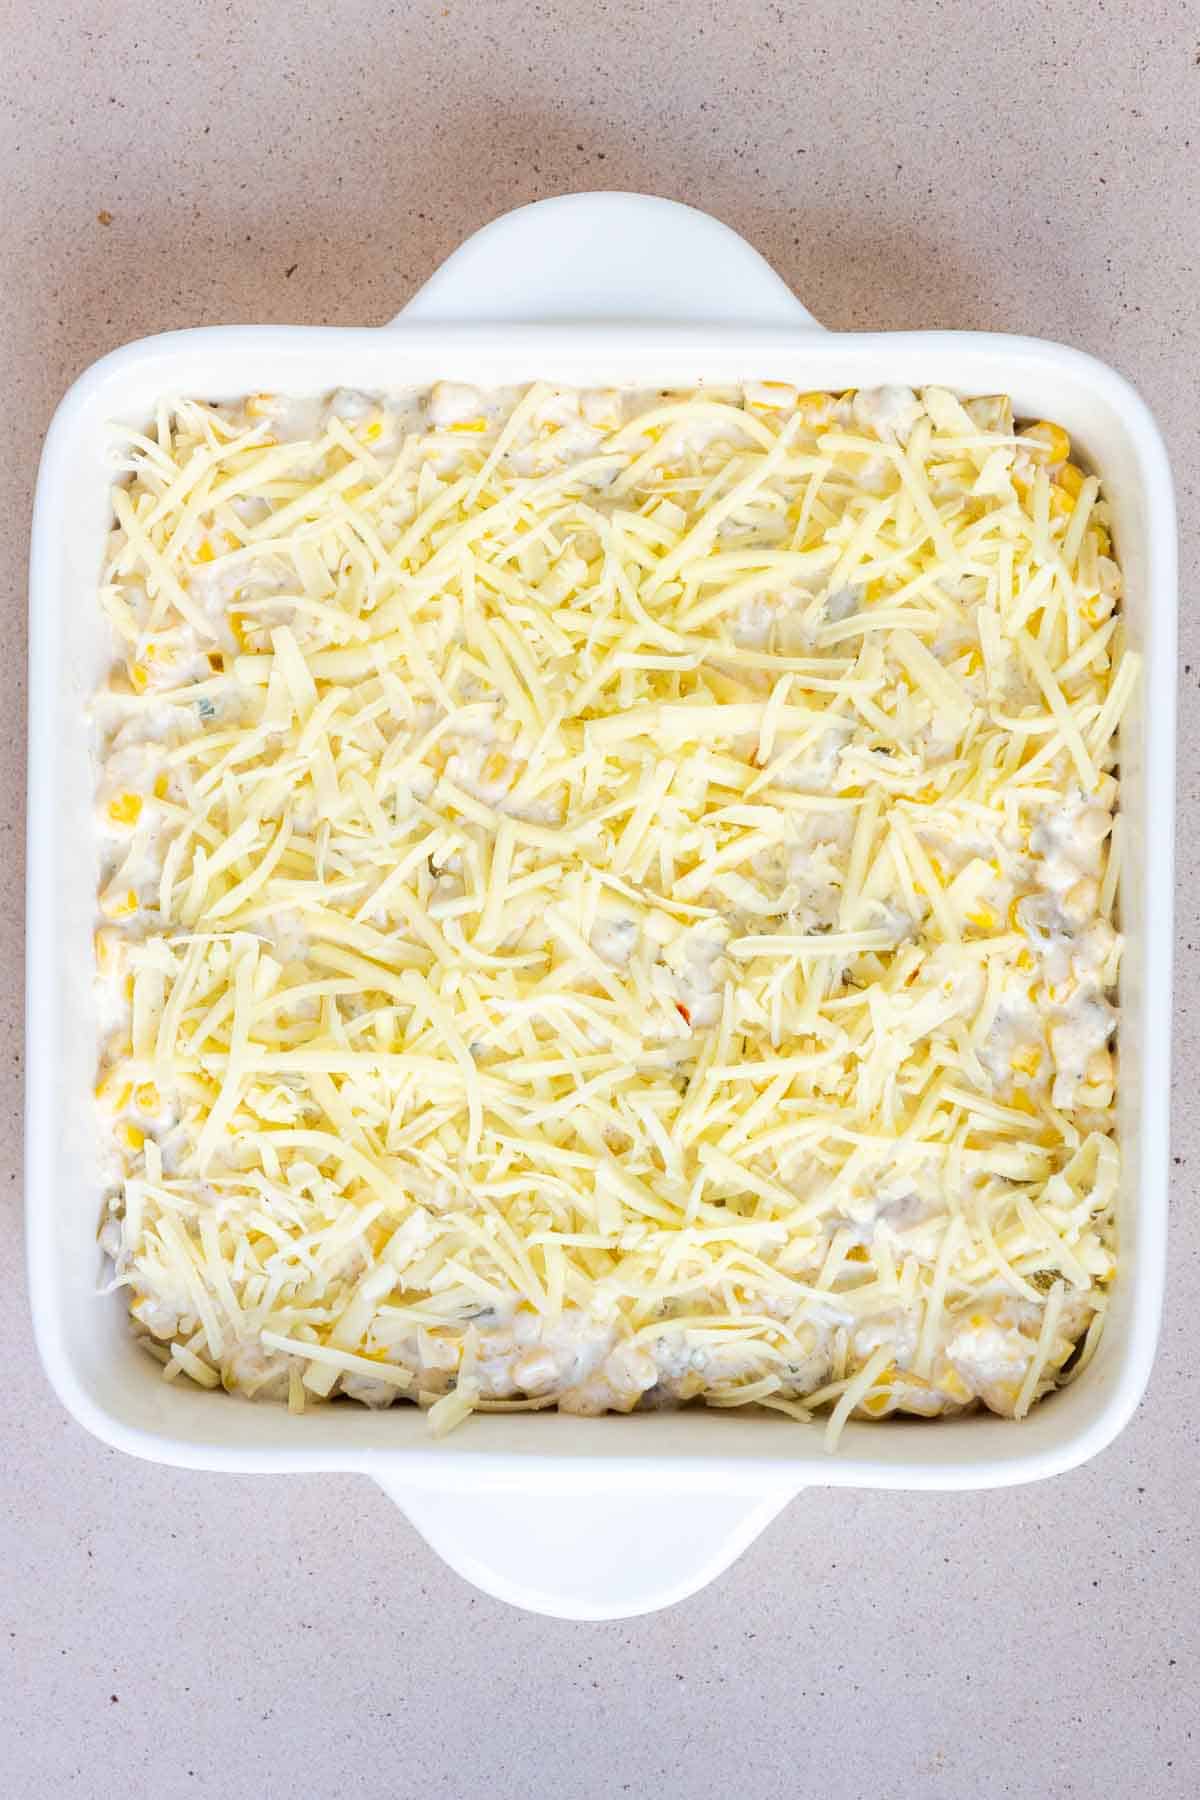 The corn casserole is topped with an even layer of shredded cheeses.